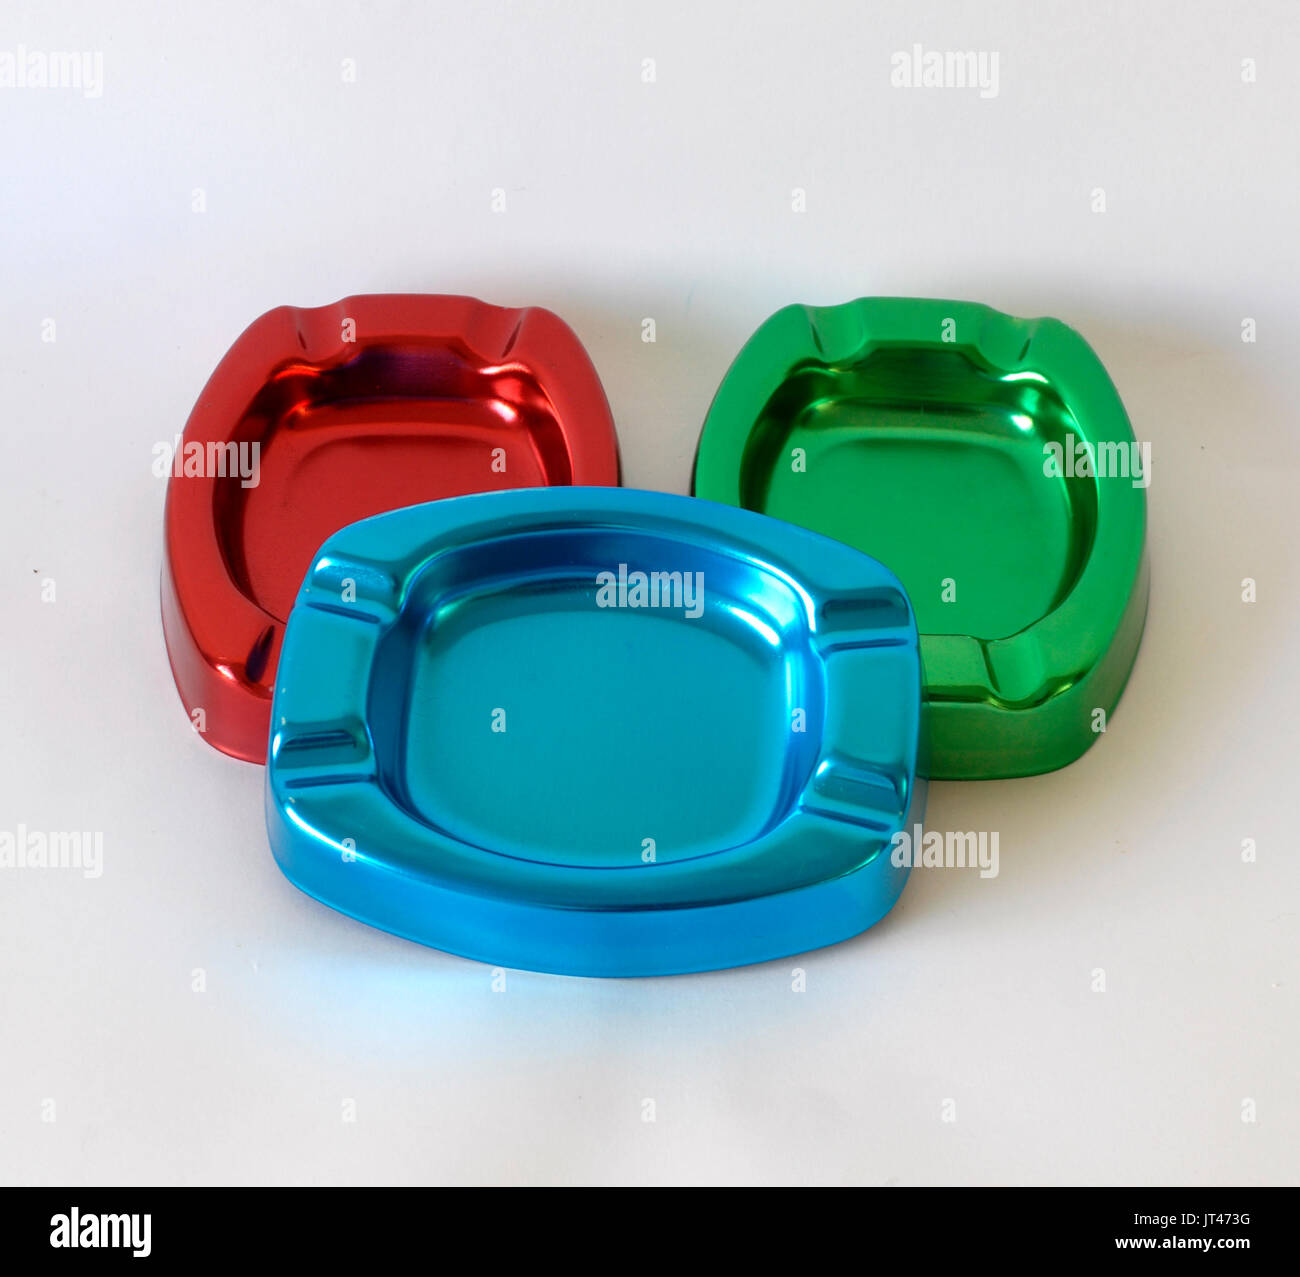 Three colorful ashtrays made by anodized aluminum, colors blue, red and green. For cigarettes smokers. Smoke Cigarette Stock Photo